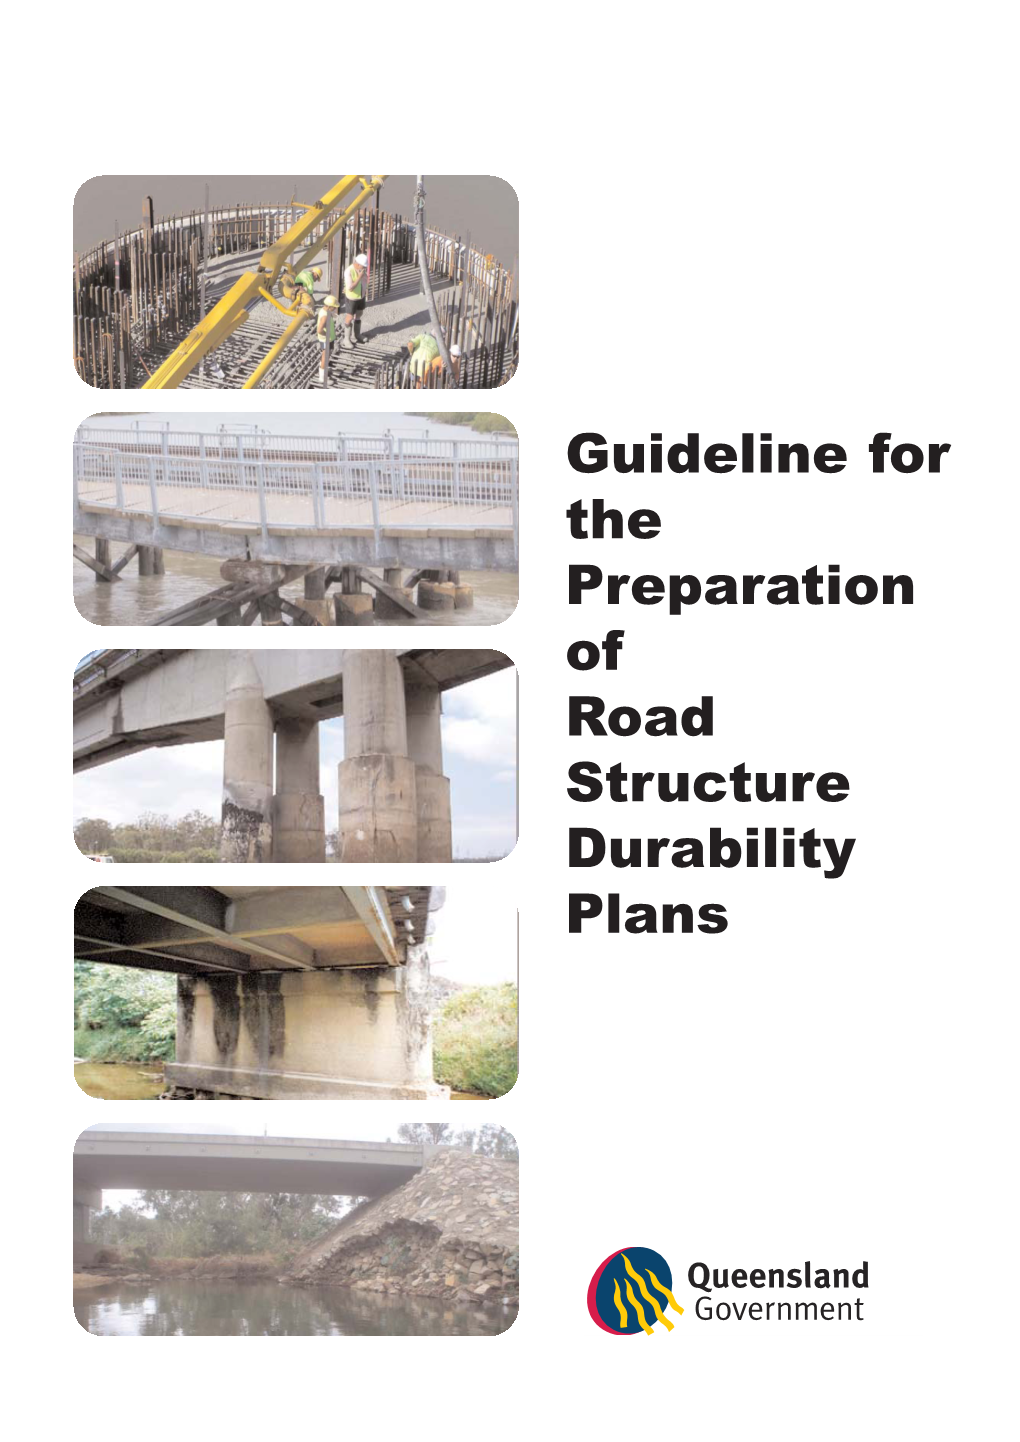 Guideline for the Preparation of Road Structure Durability Plans